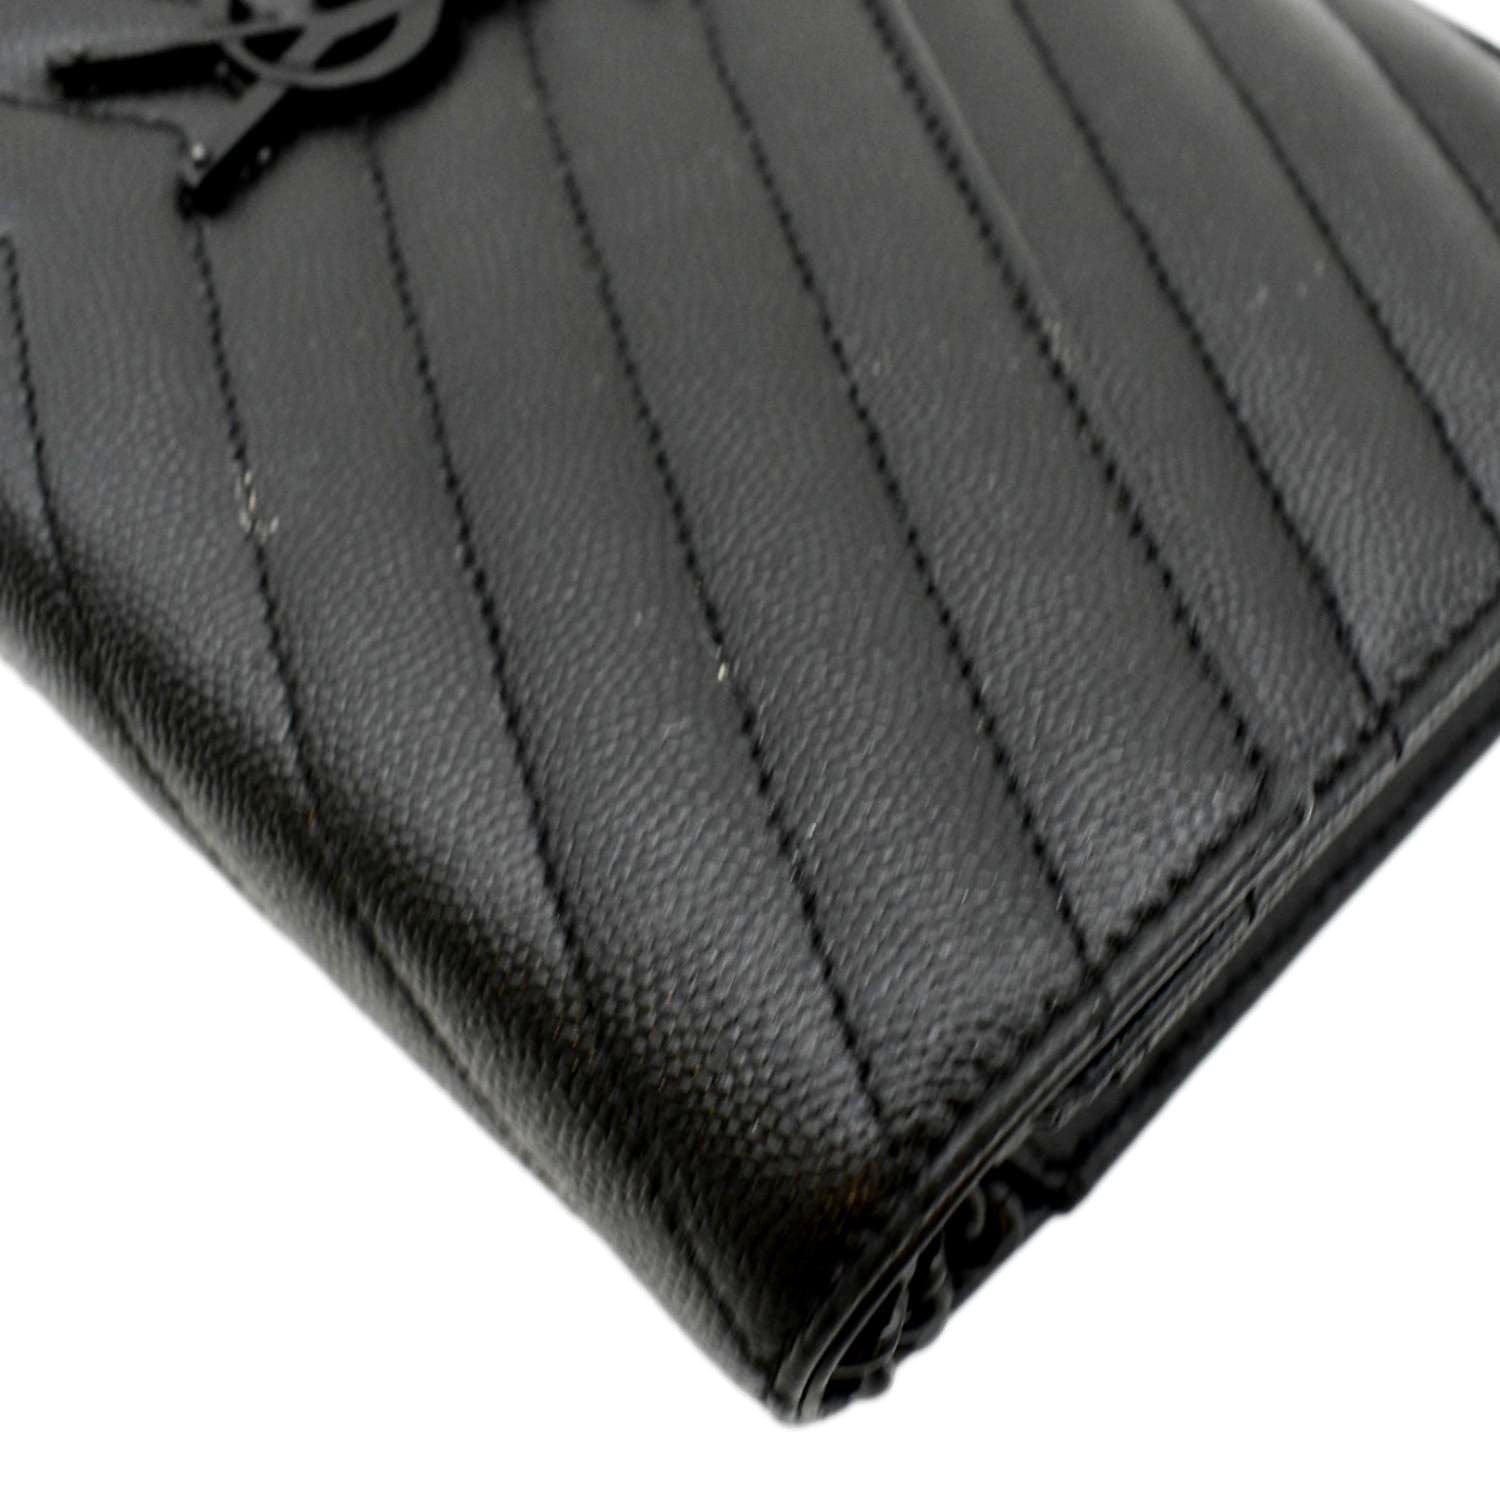 Cassandre Small Leather Wallet On Chain in Black - Saint Laurent